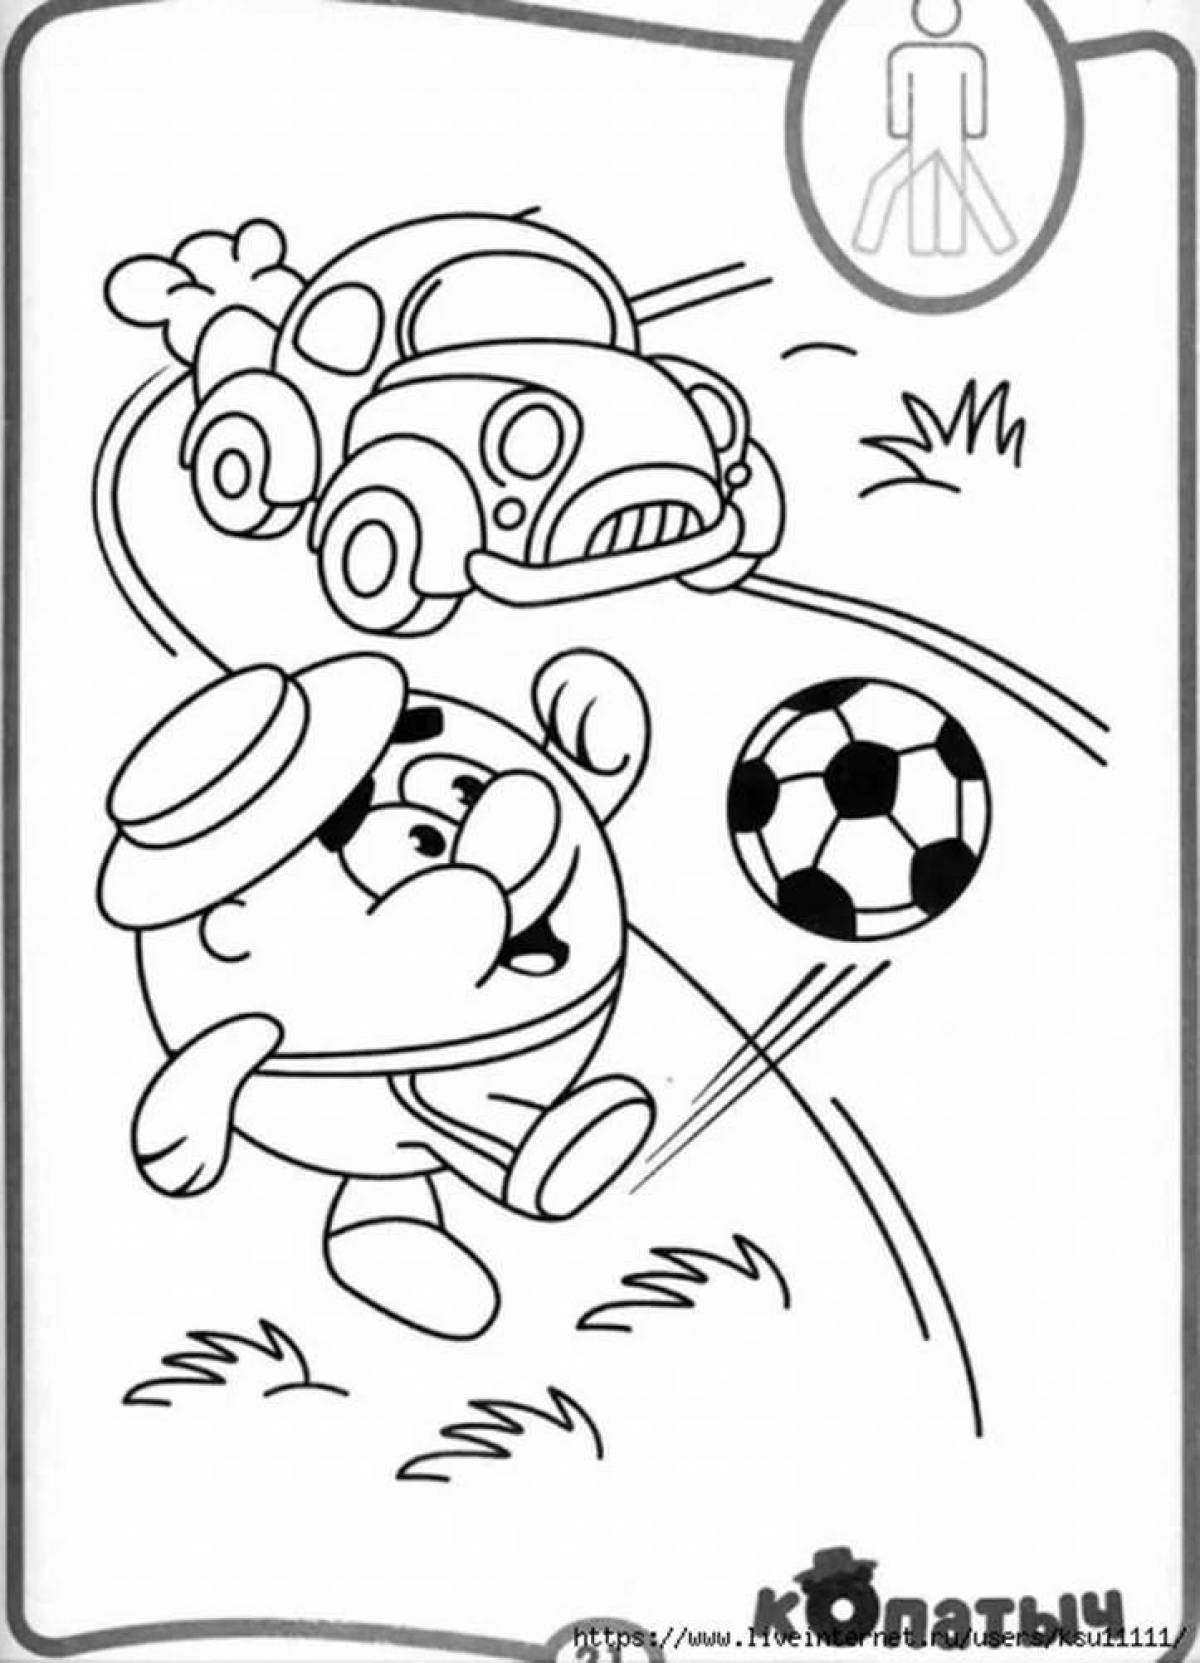 Creative traffic rules coloring pages for kids